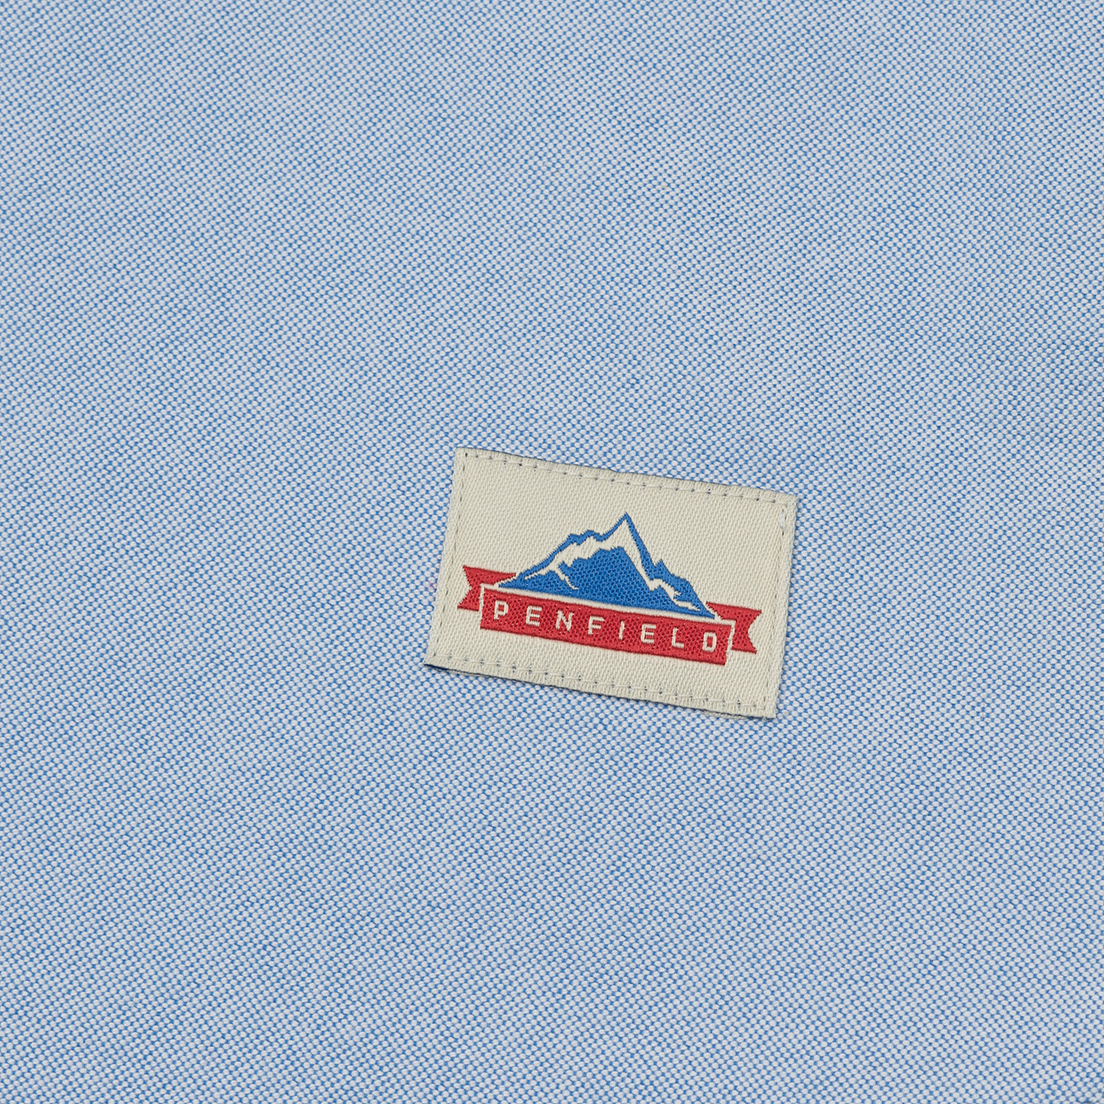 Penfield Мужская рубашка Donaghue Classic Oxford